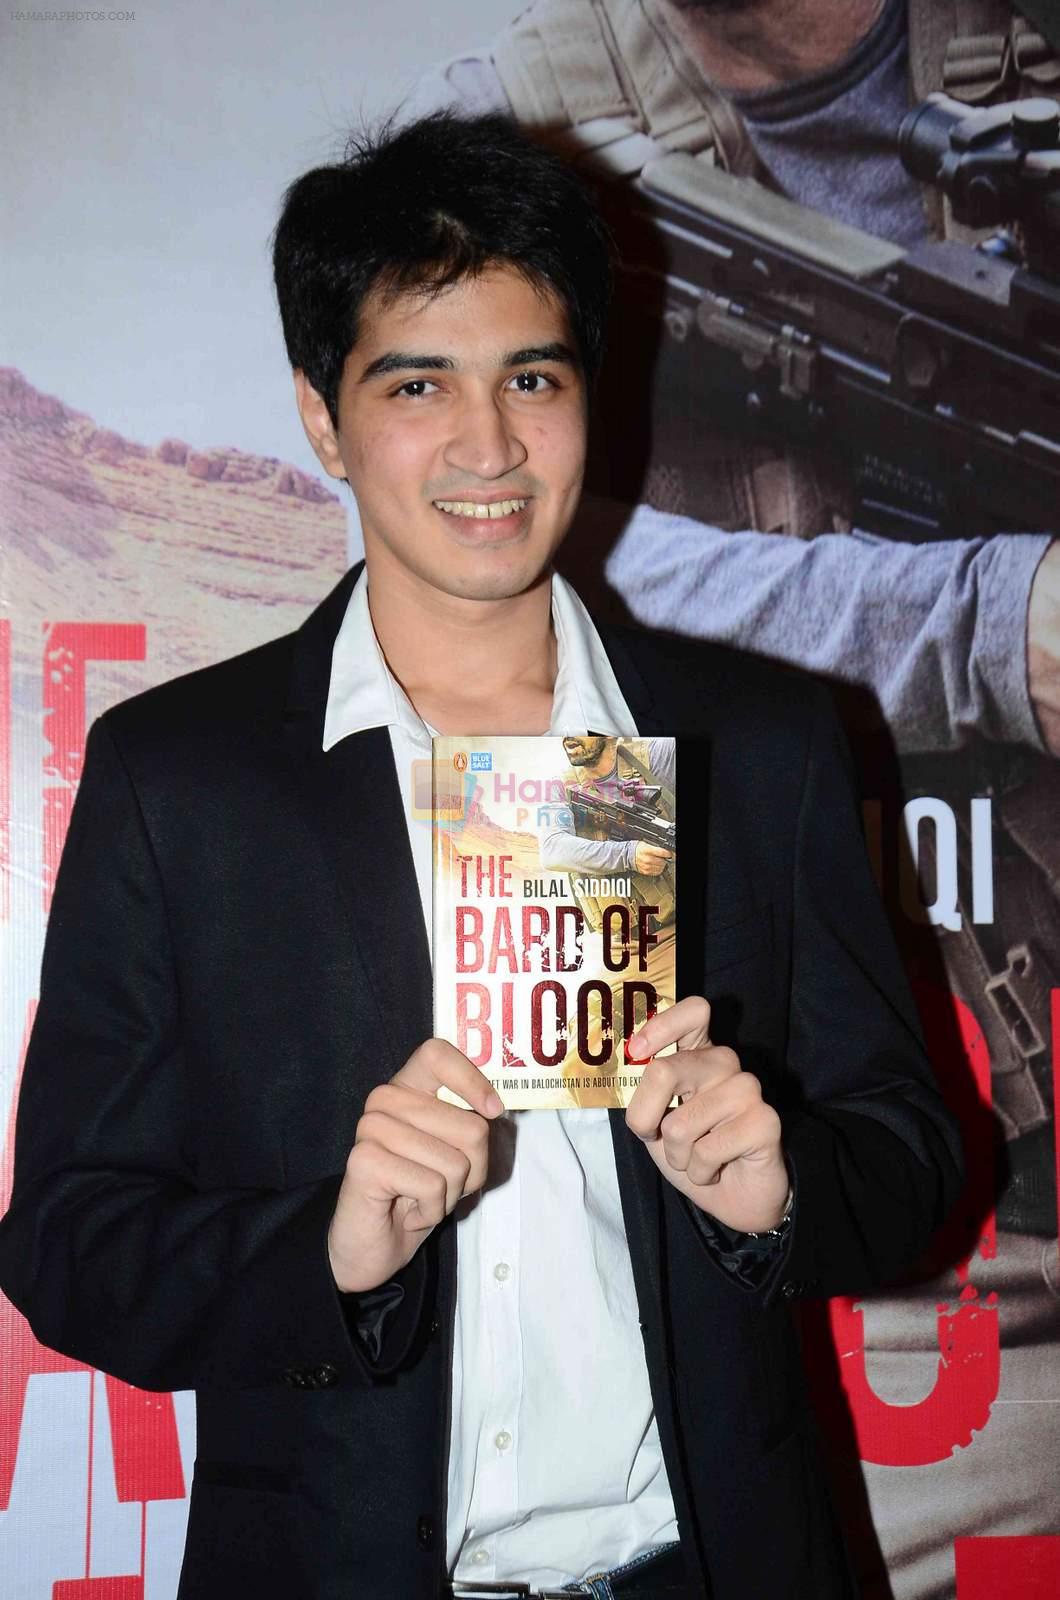 at Bilal Siddiqui's book launch on 4th May 2015